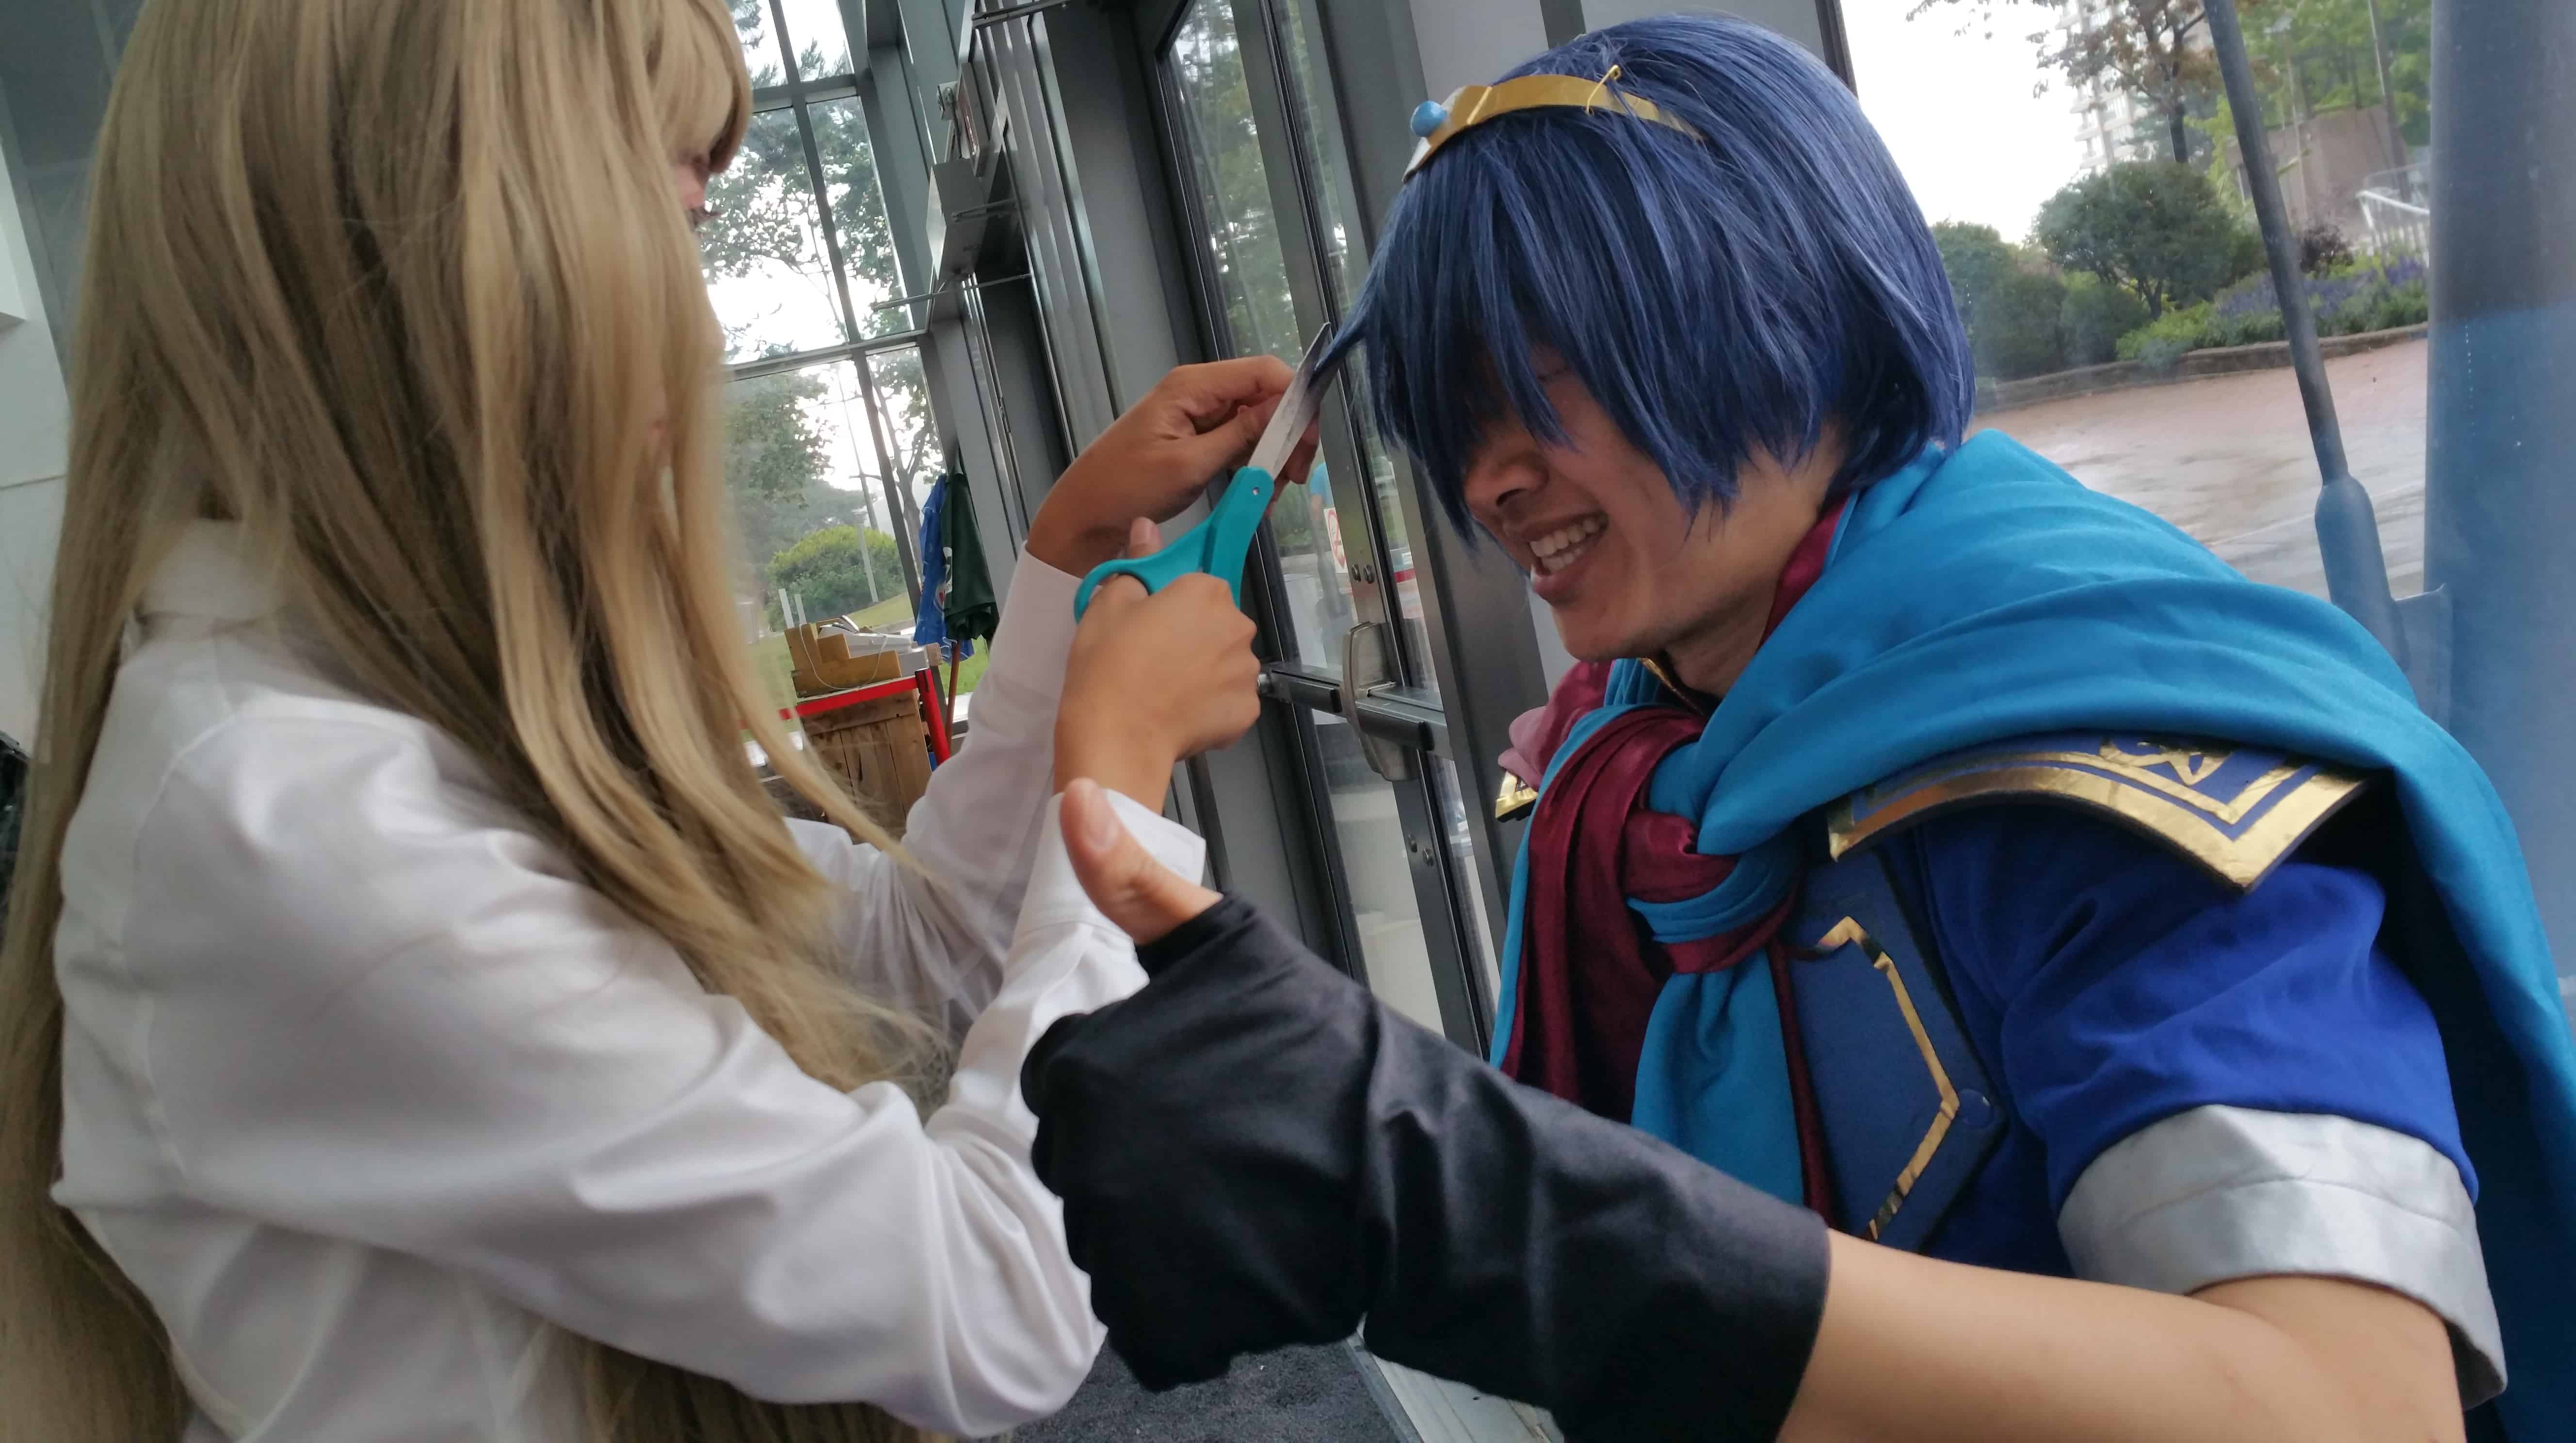 My friend helping me with my Marth before a shoot.